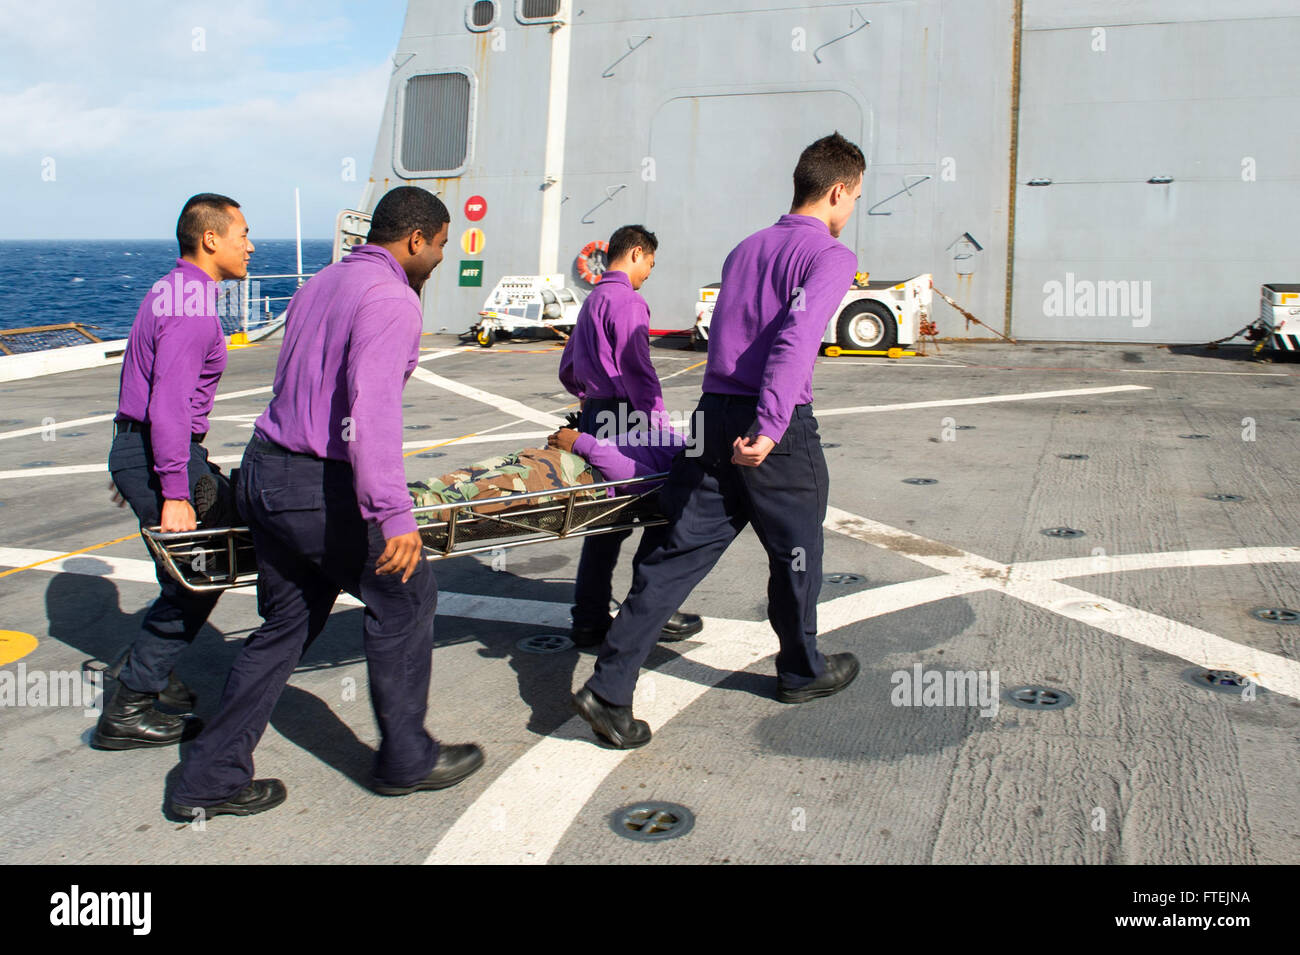 ATLANTIC OCEAN (Dec. 21, 2014) Sailors practice stretcher-bearer procedures during flight deck damage control training aboard USS New York (LPD 21) Dec. 21, 2014. New York, a San Antonio-class amphibious transport dock ship that is part of the Iwo Jima Amphibious Ready Group/24th Marine Expeditionary Unit, is conducting naval operations in the U.S. 6th Fleet area of operations in support of U.S. national security interests in Europe. Stock Photo